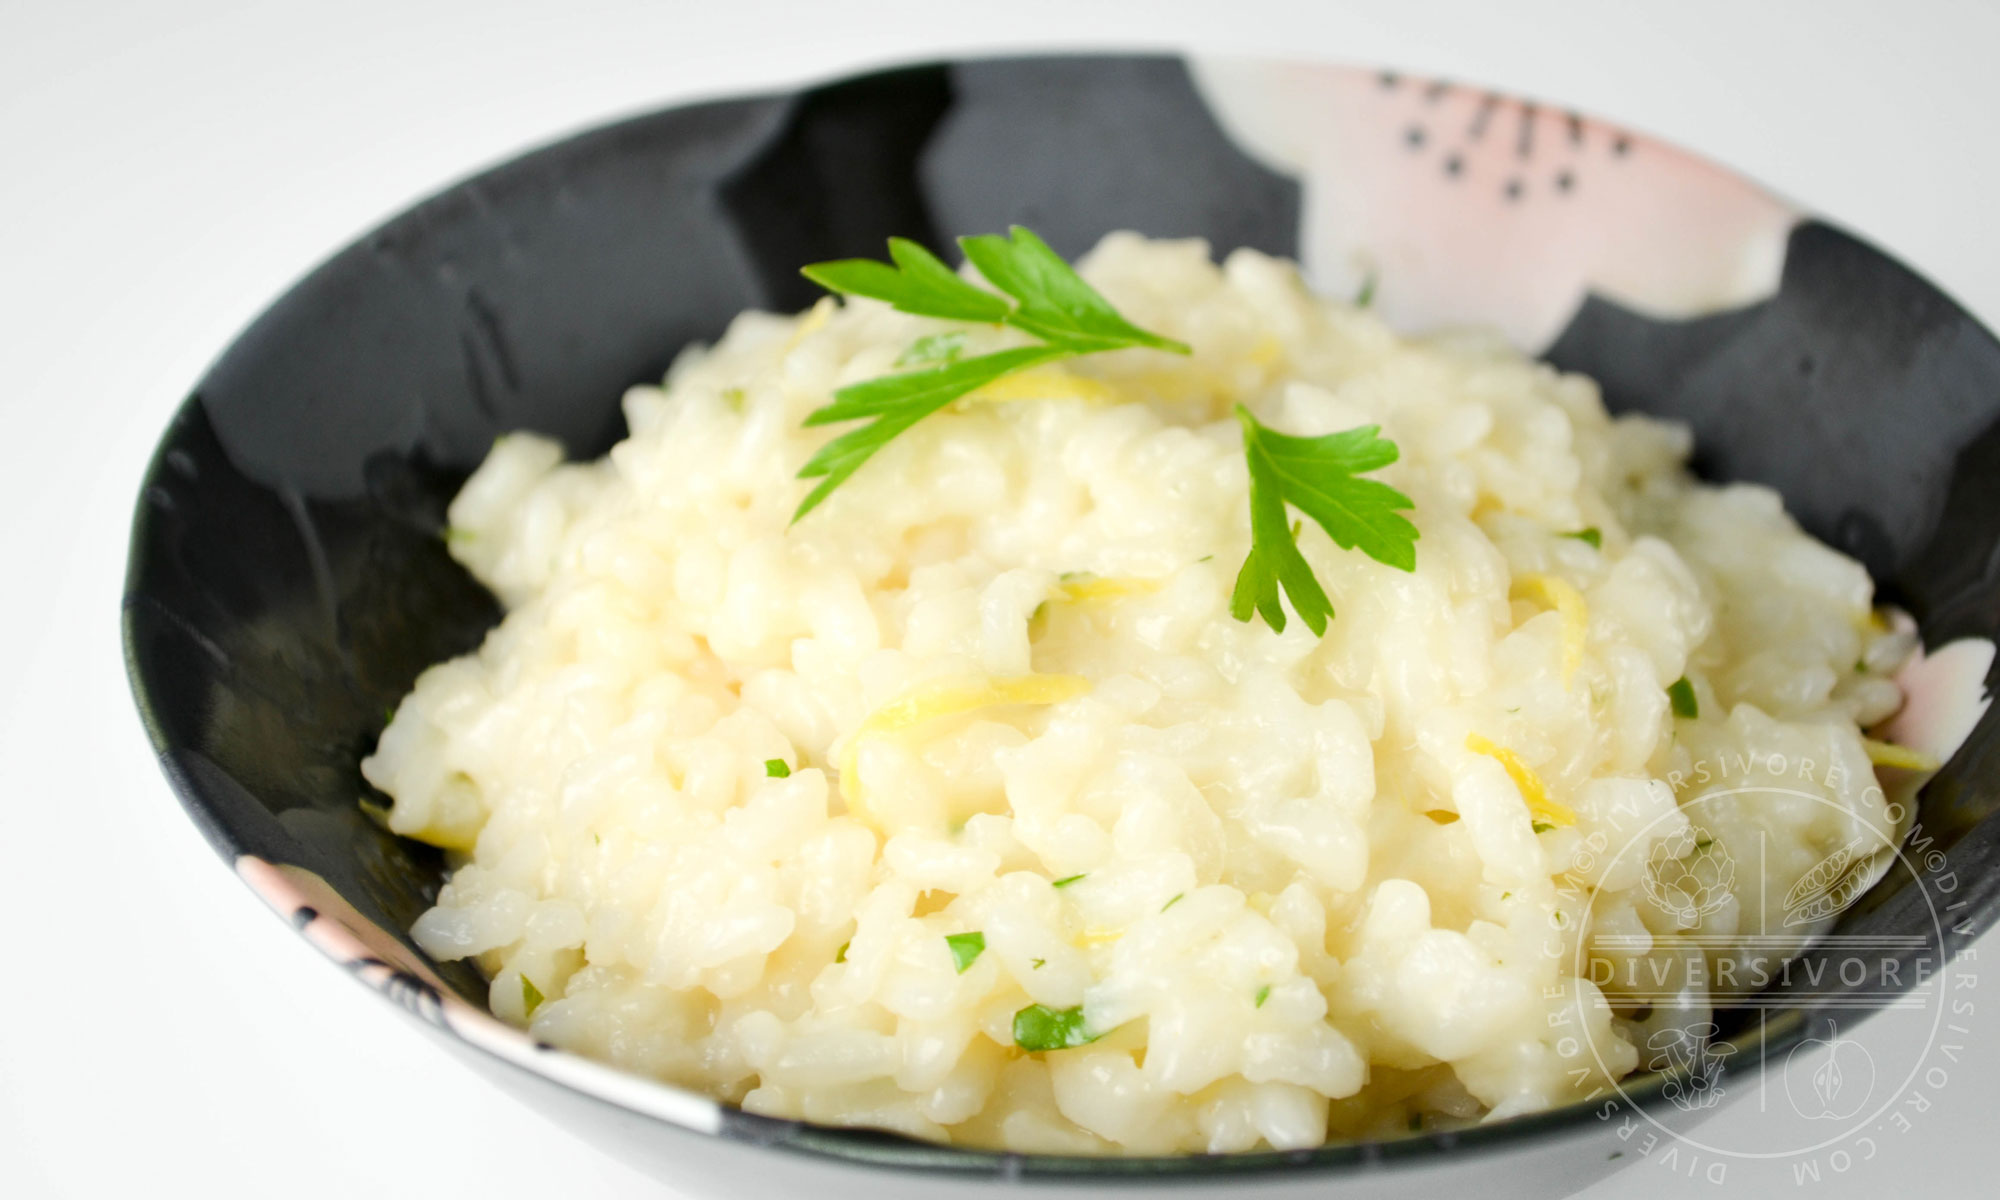 Featured image for “Japanese Lemon Herb Risotto”